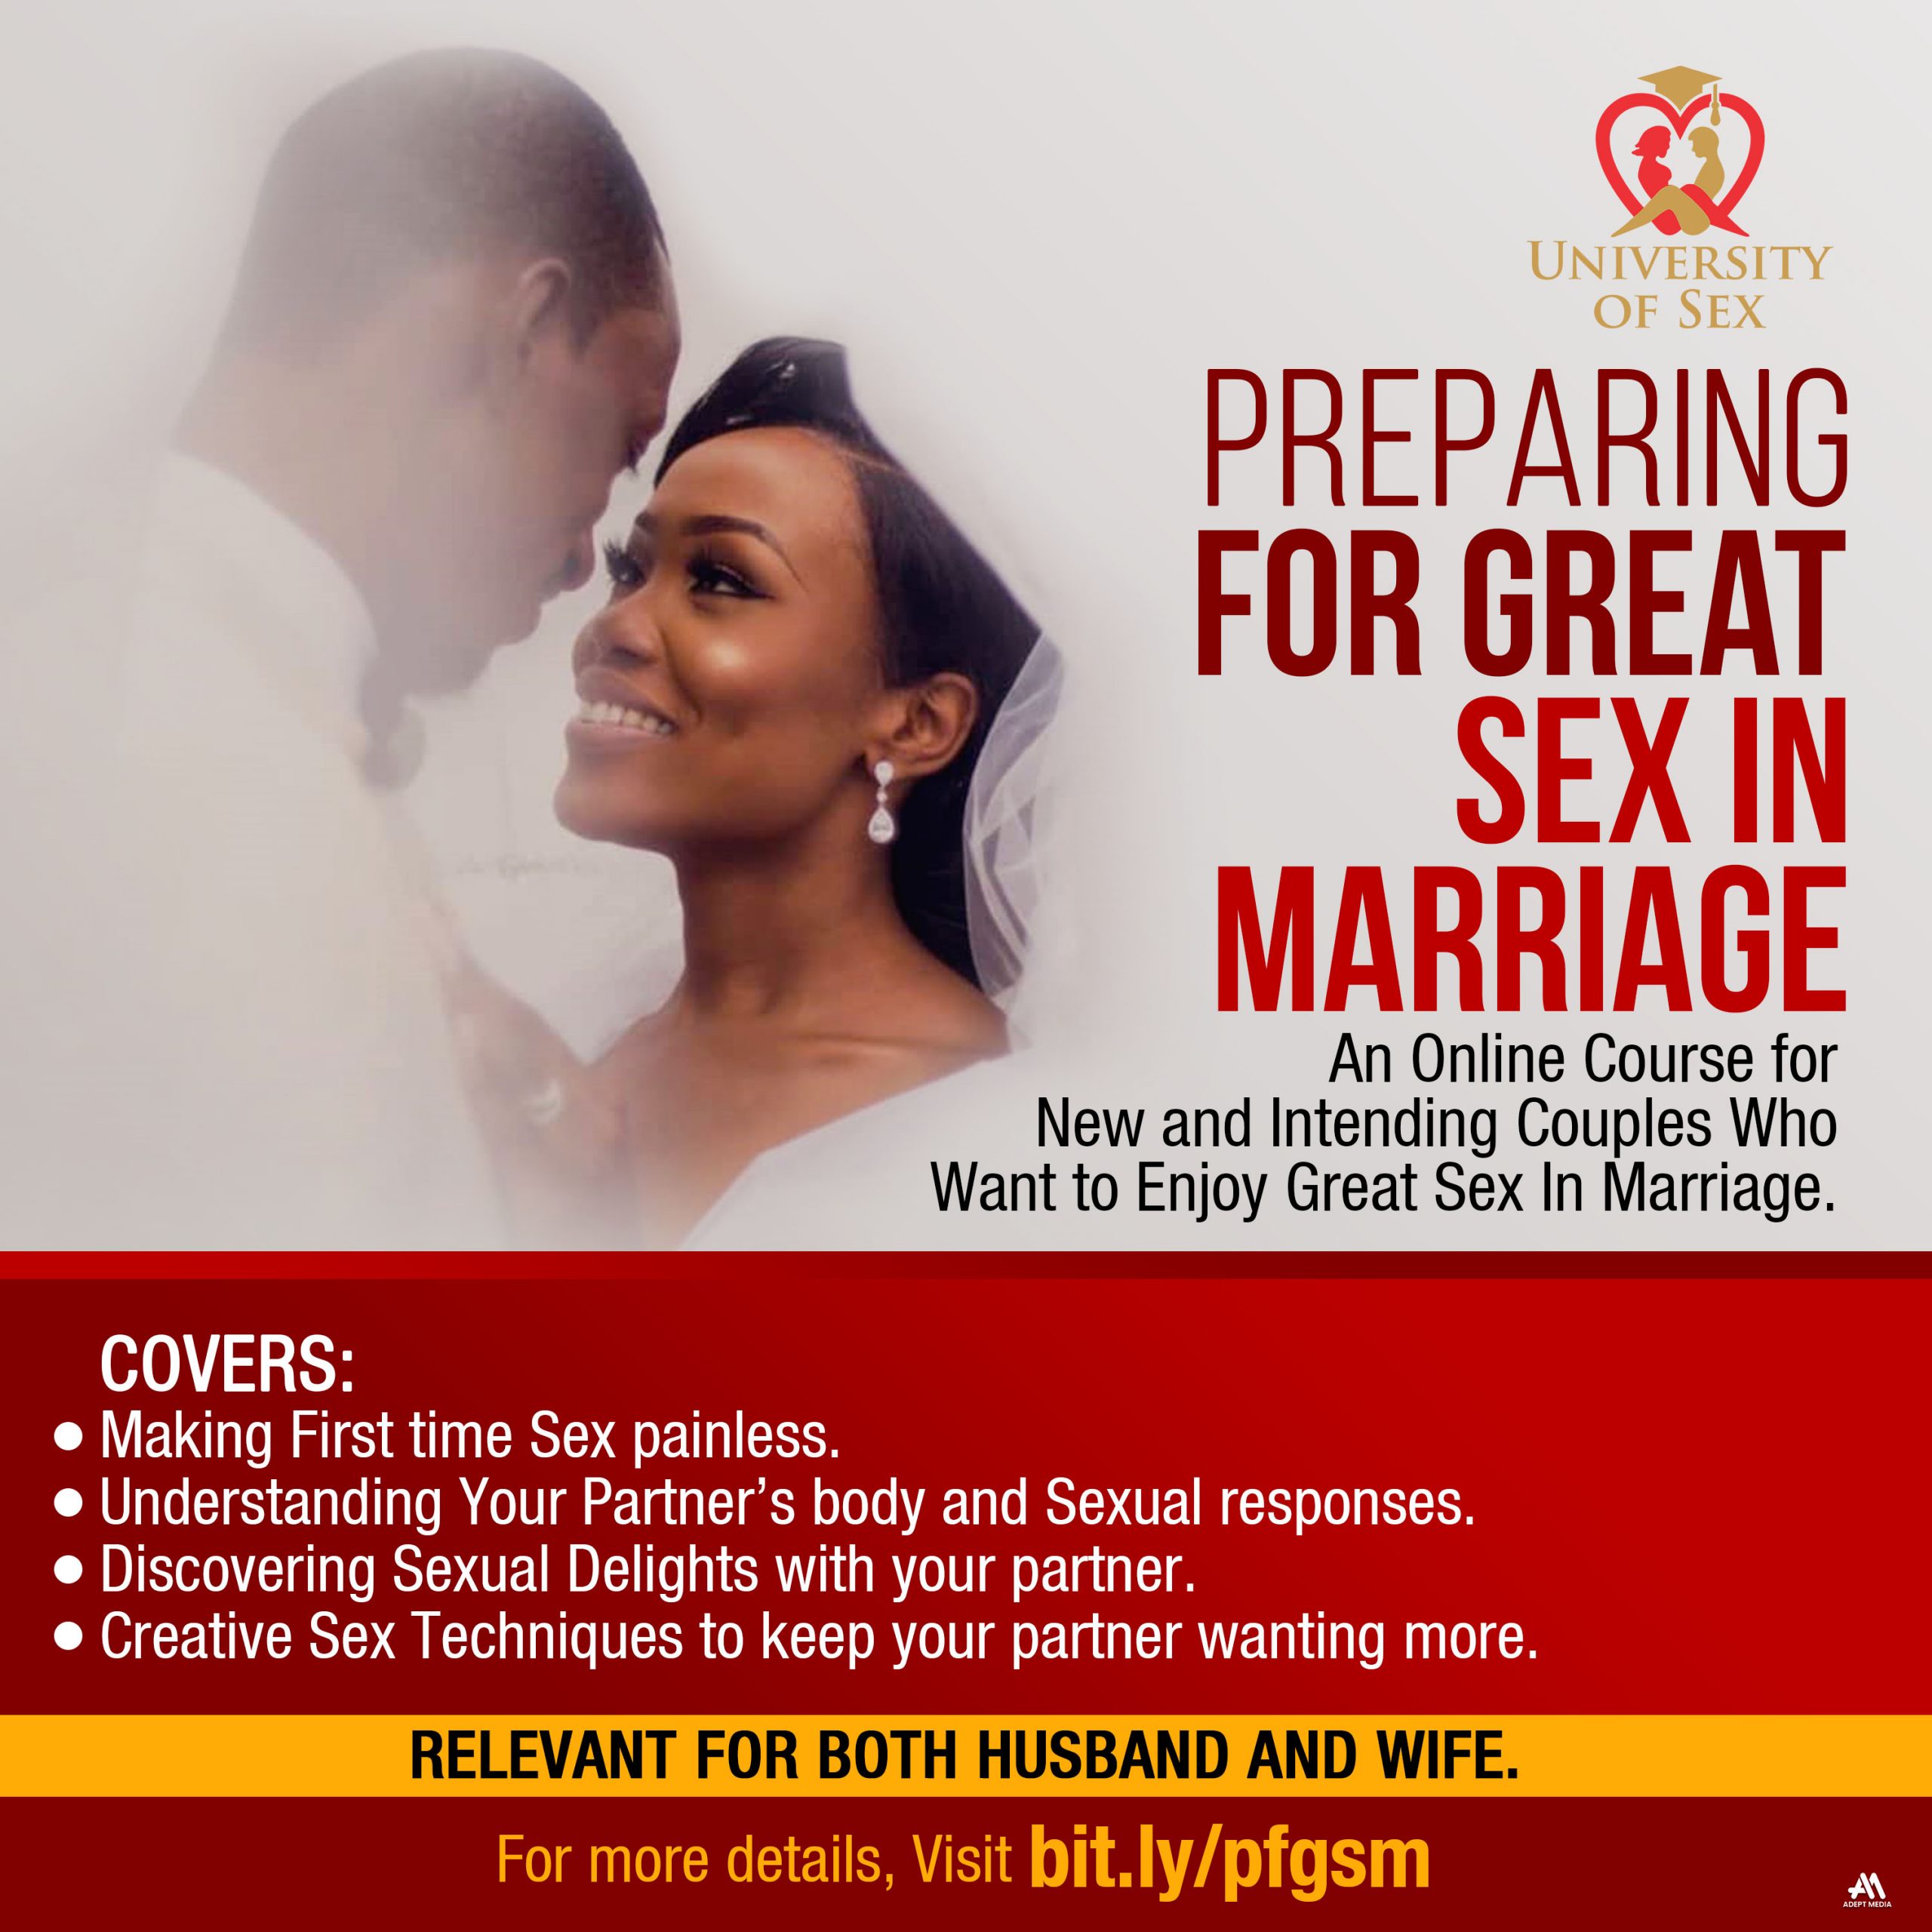 Preparing For Great Sex In Marriage image